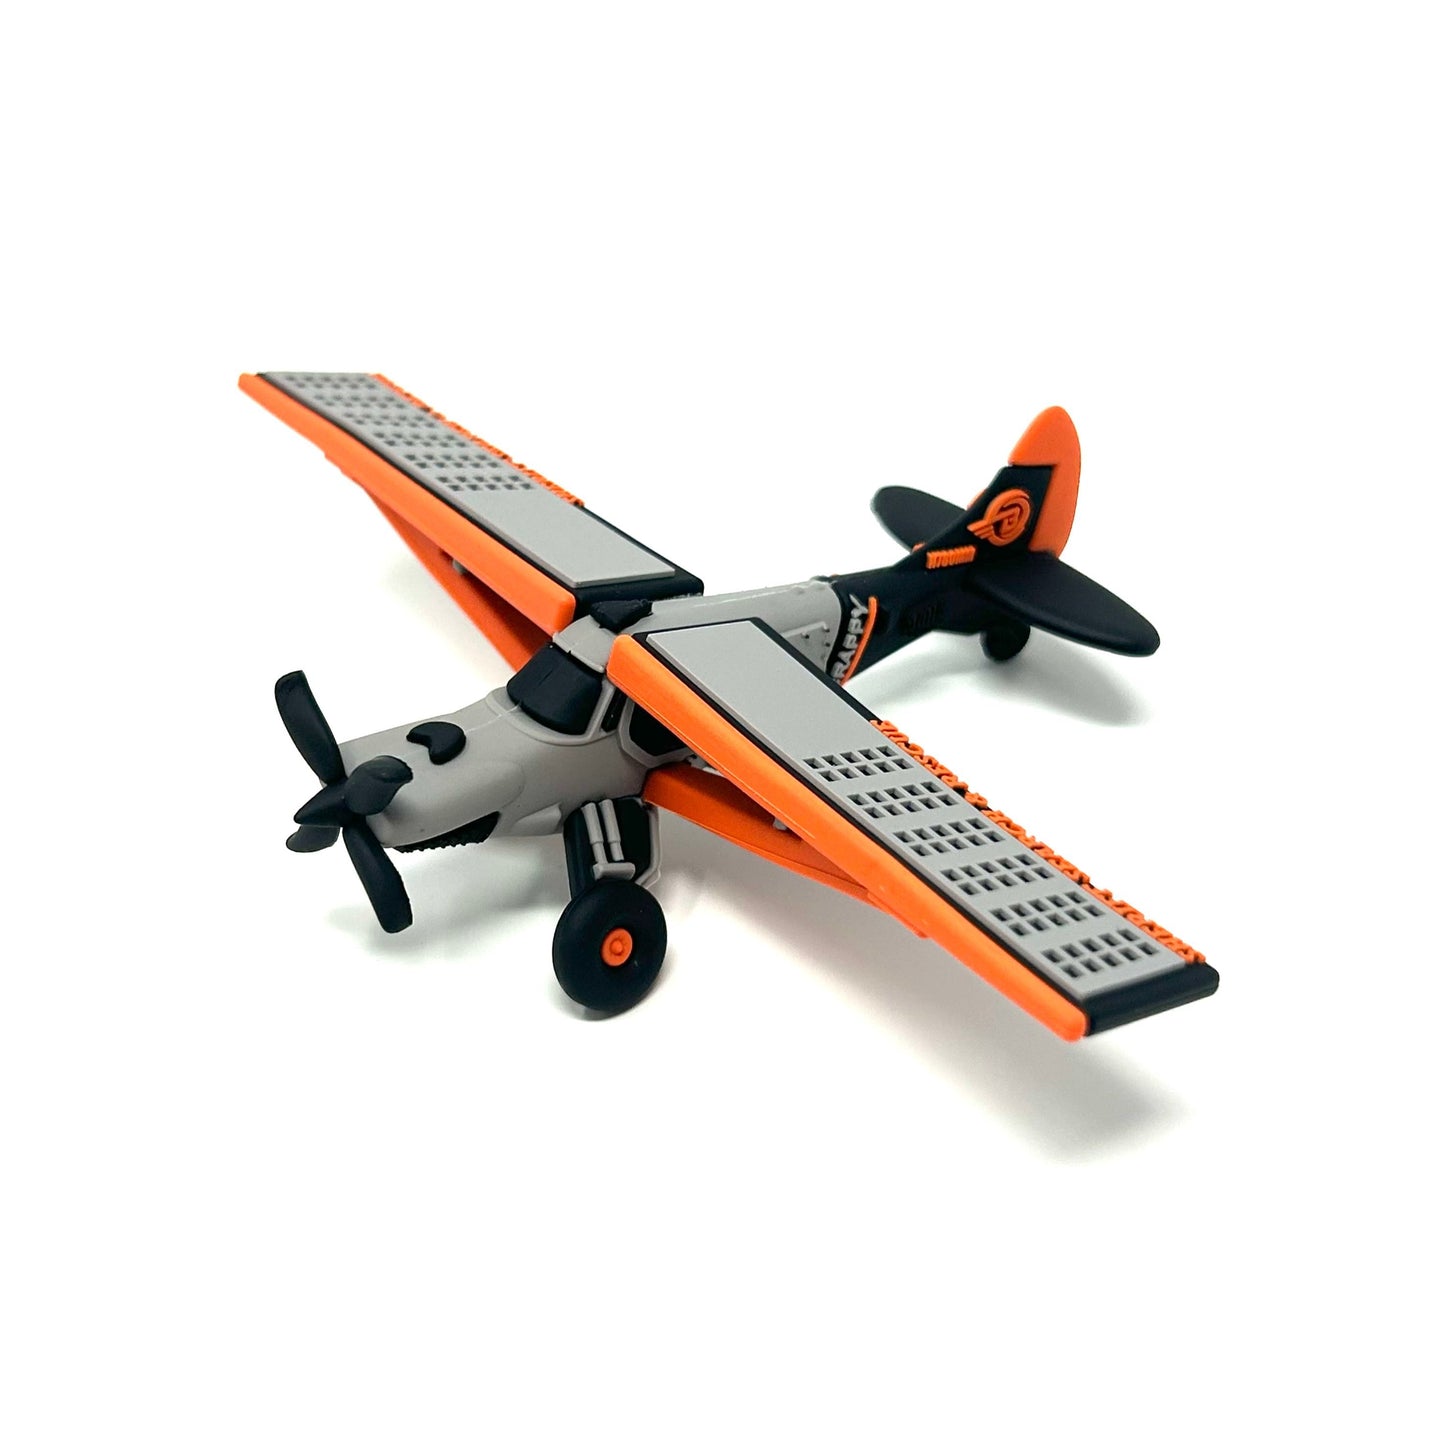 Scrappy Toy Plane or Christmas Ornament